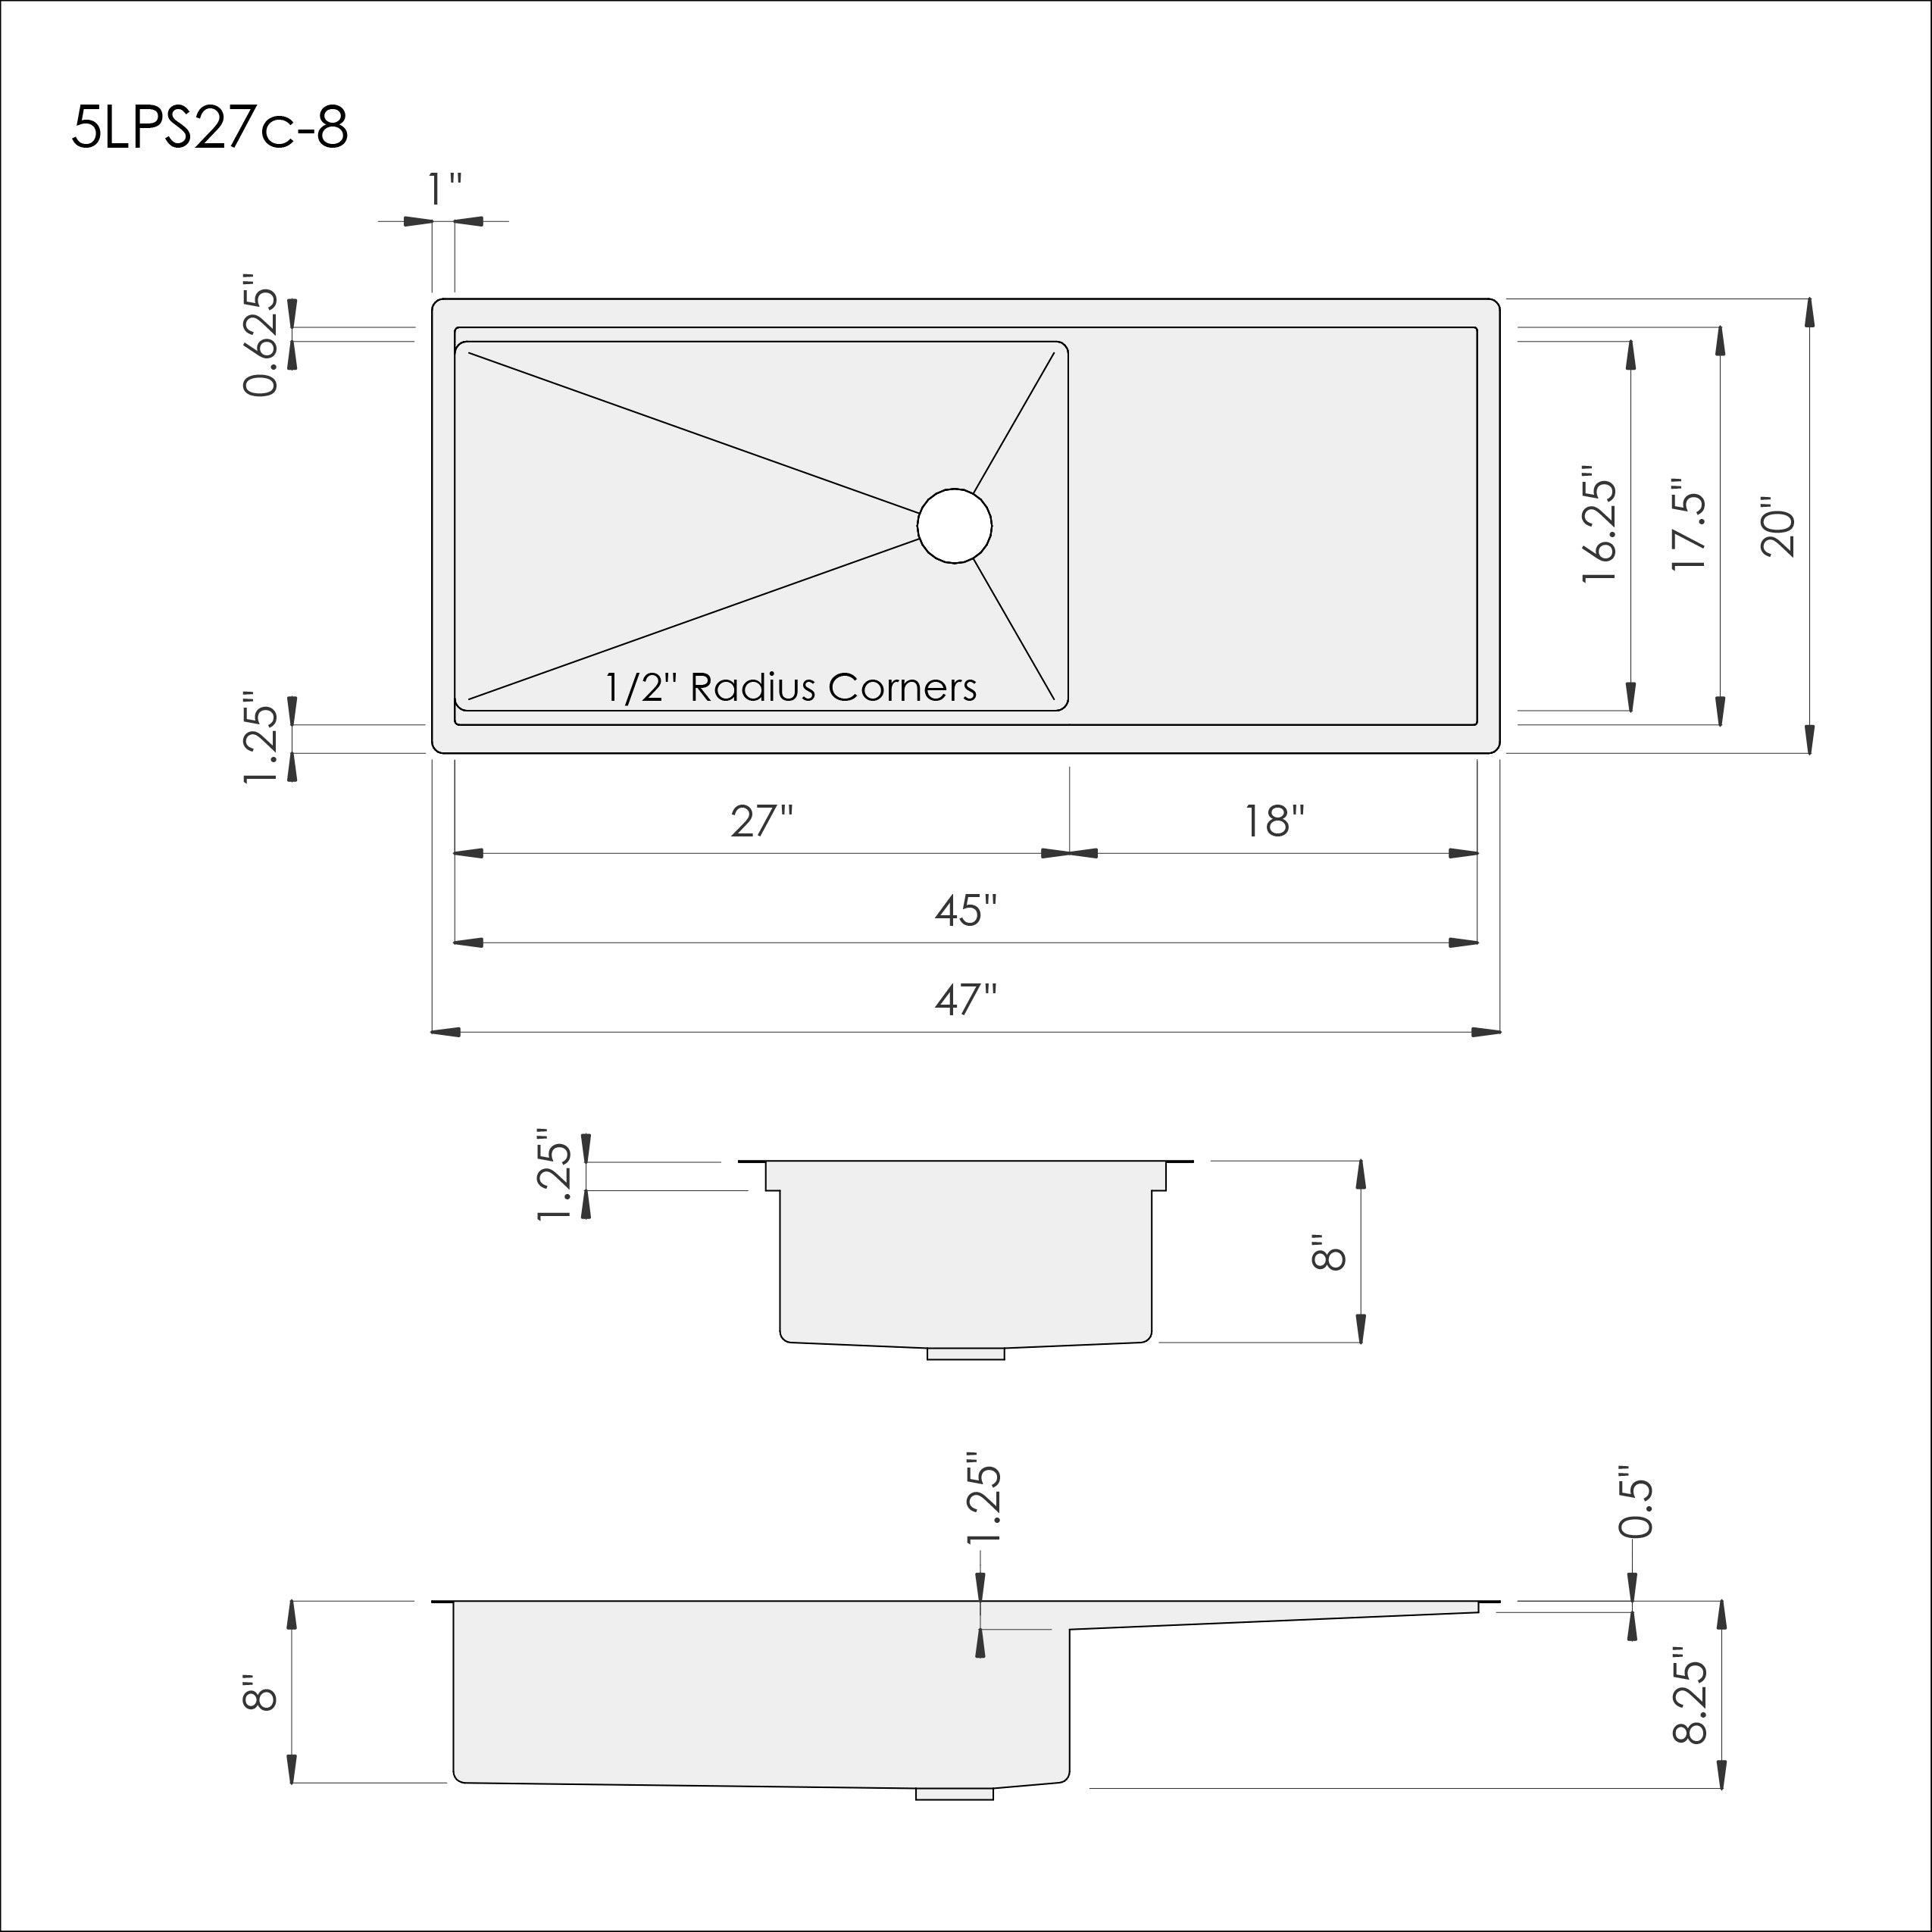 Dimensions for Create Good Sinks 47 inch stainless steel undermount workstation drainboard sink. Reversible design, 27 inch bowl, single bowl, 8 inch depth. 5LPS27c8